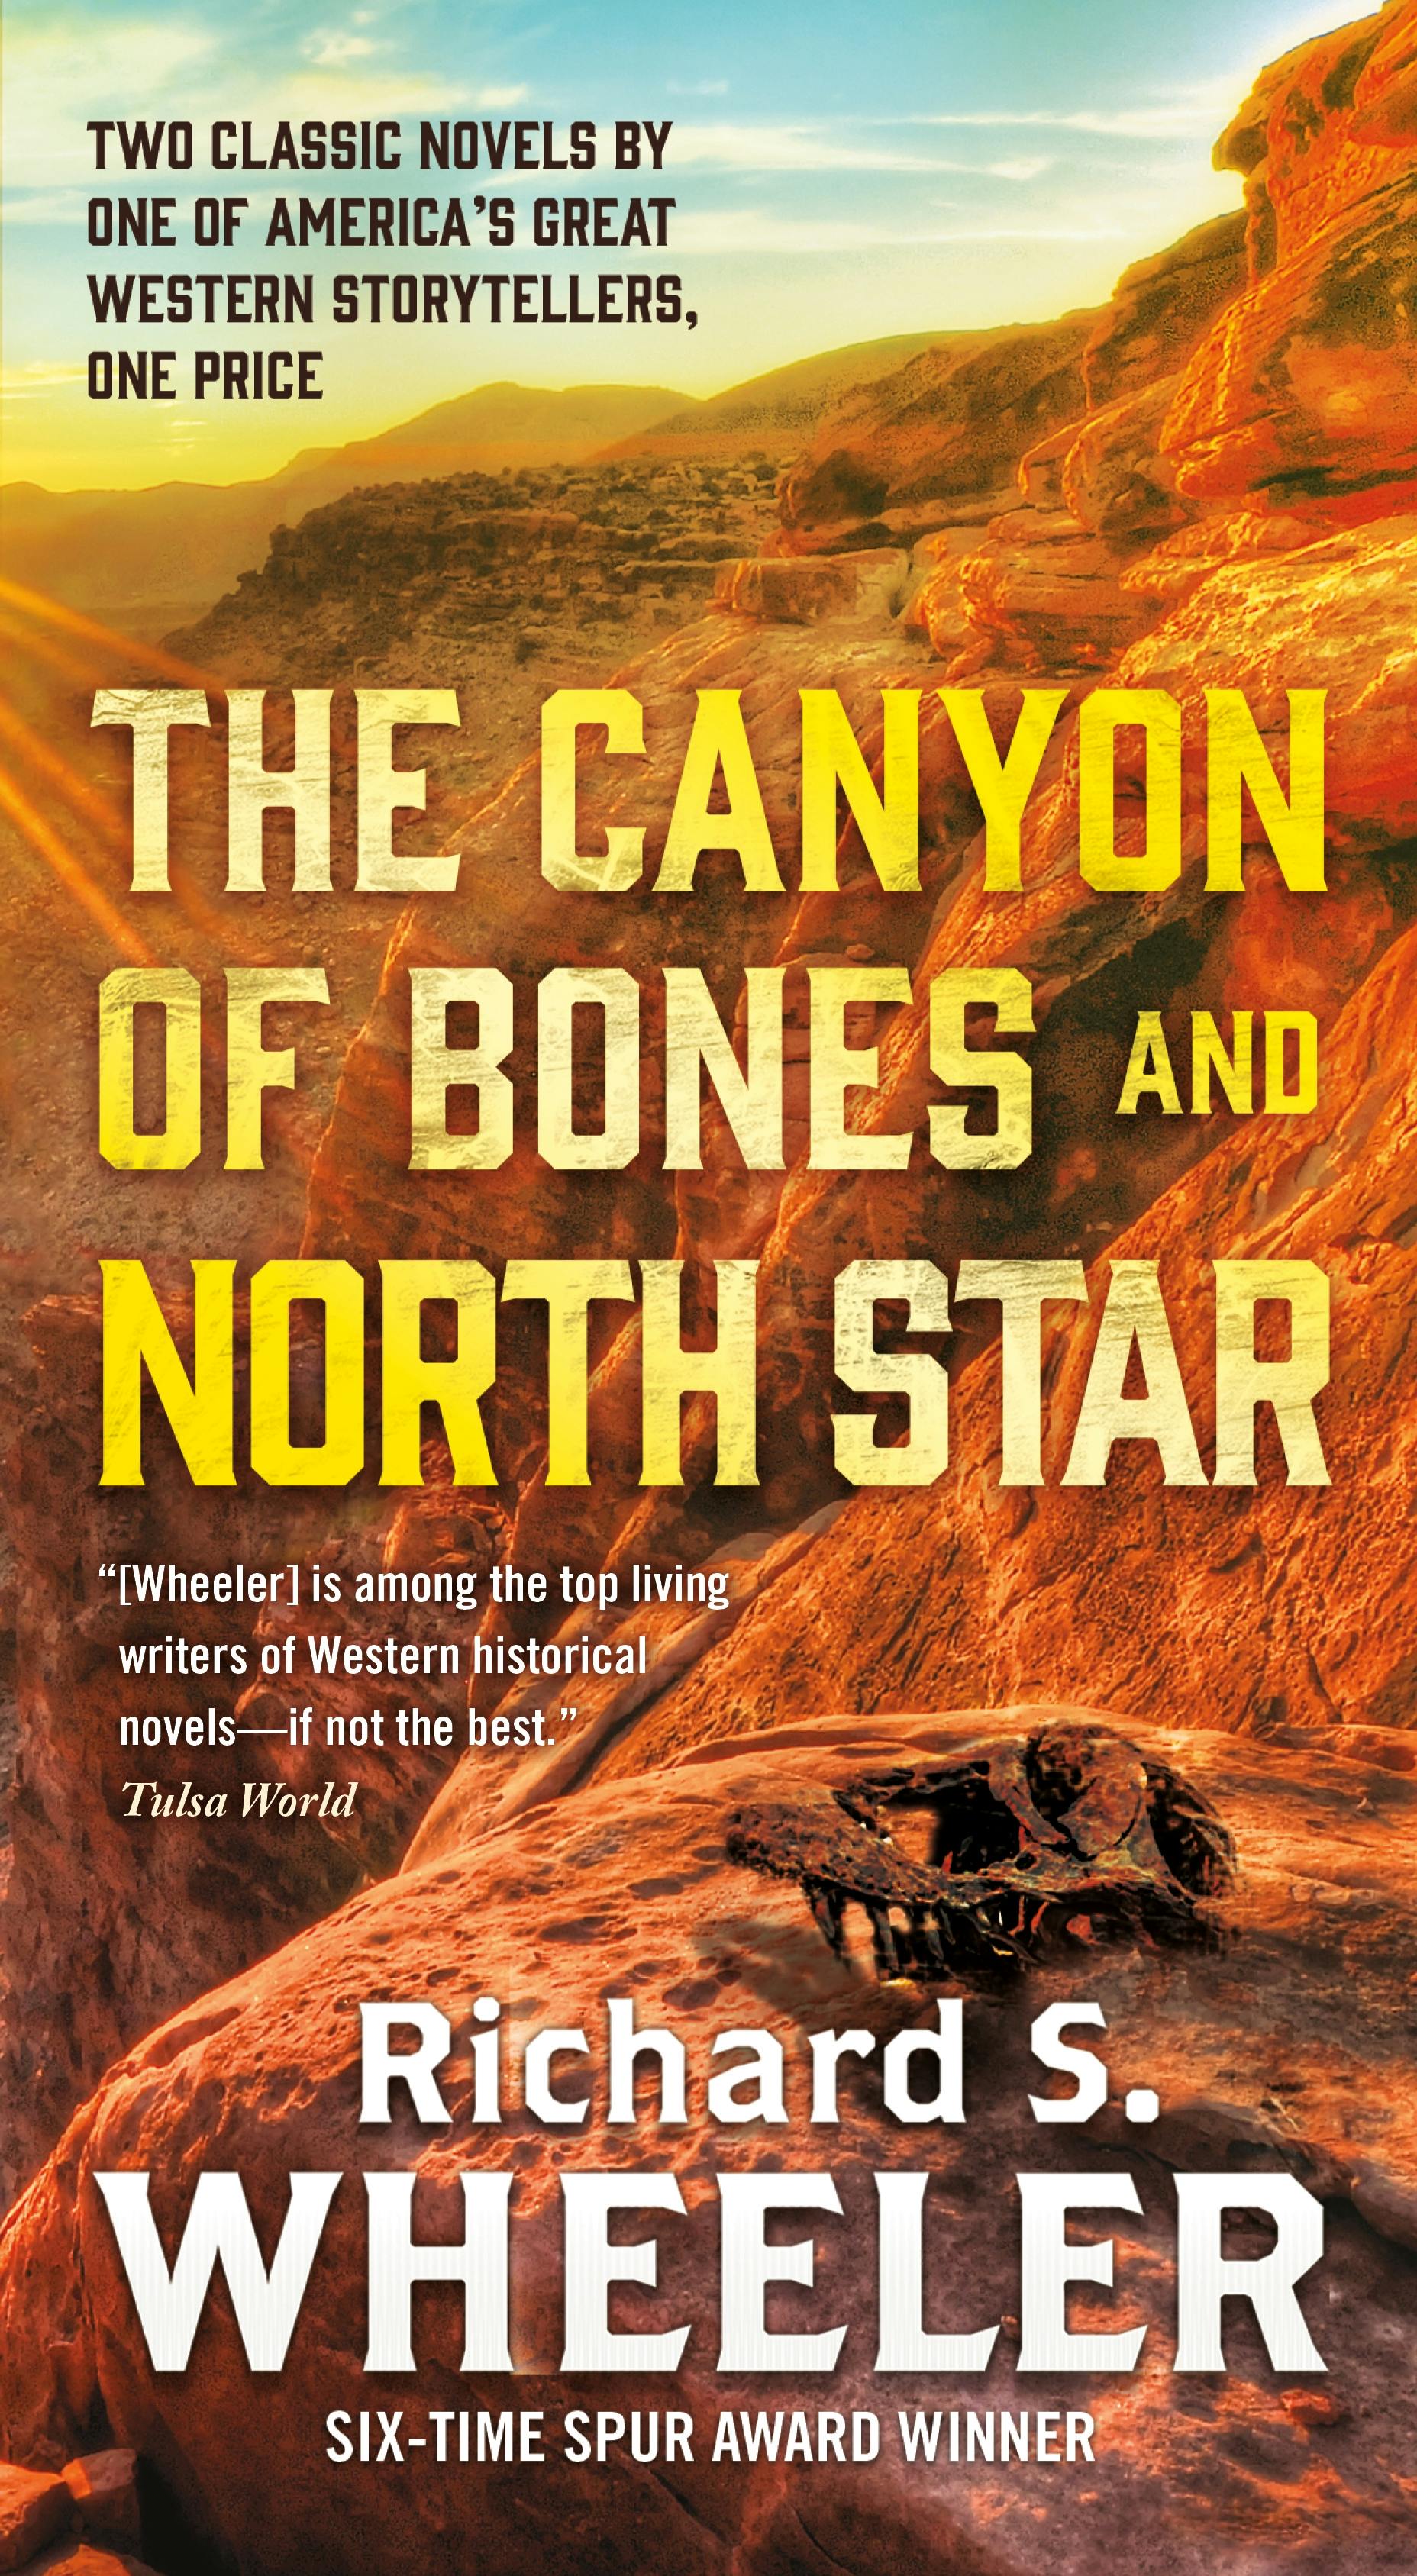 Cover for the book titled as: The Canyon of Bones and North Star